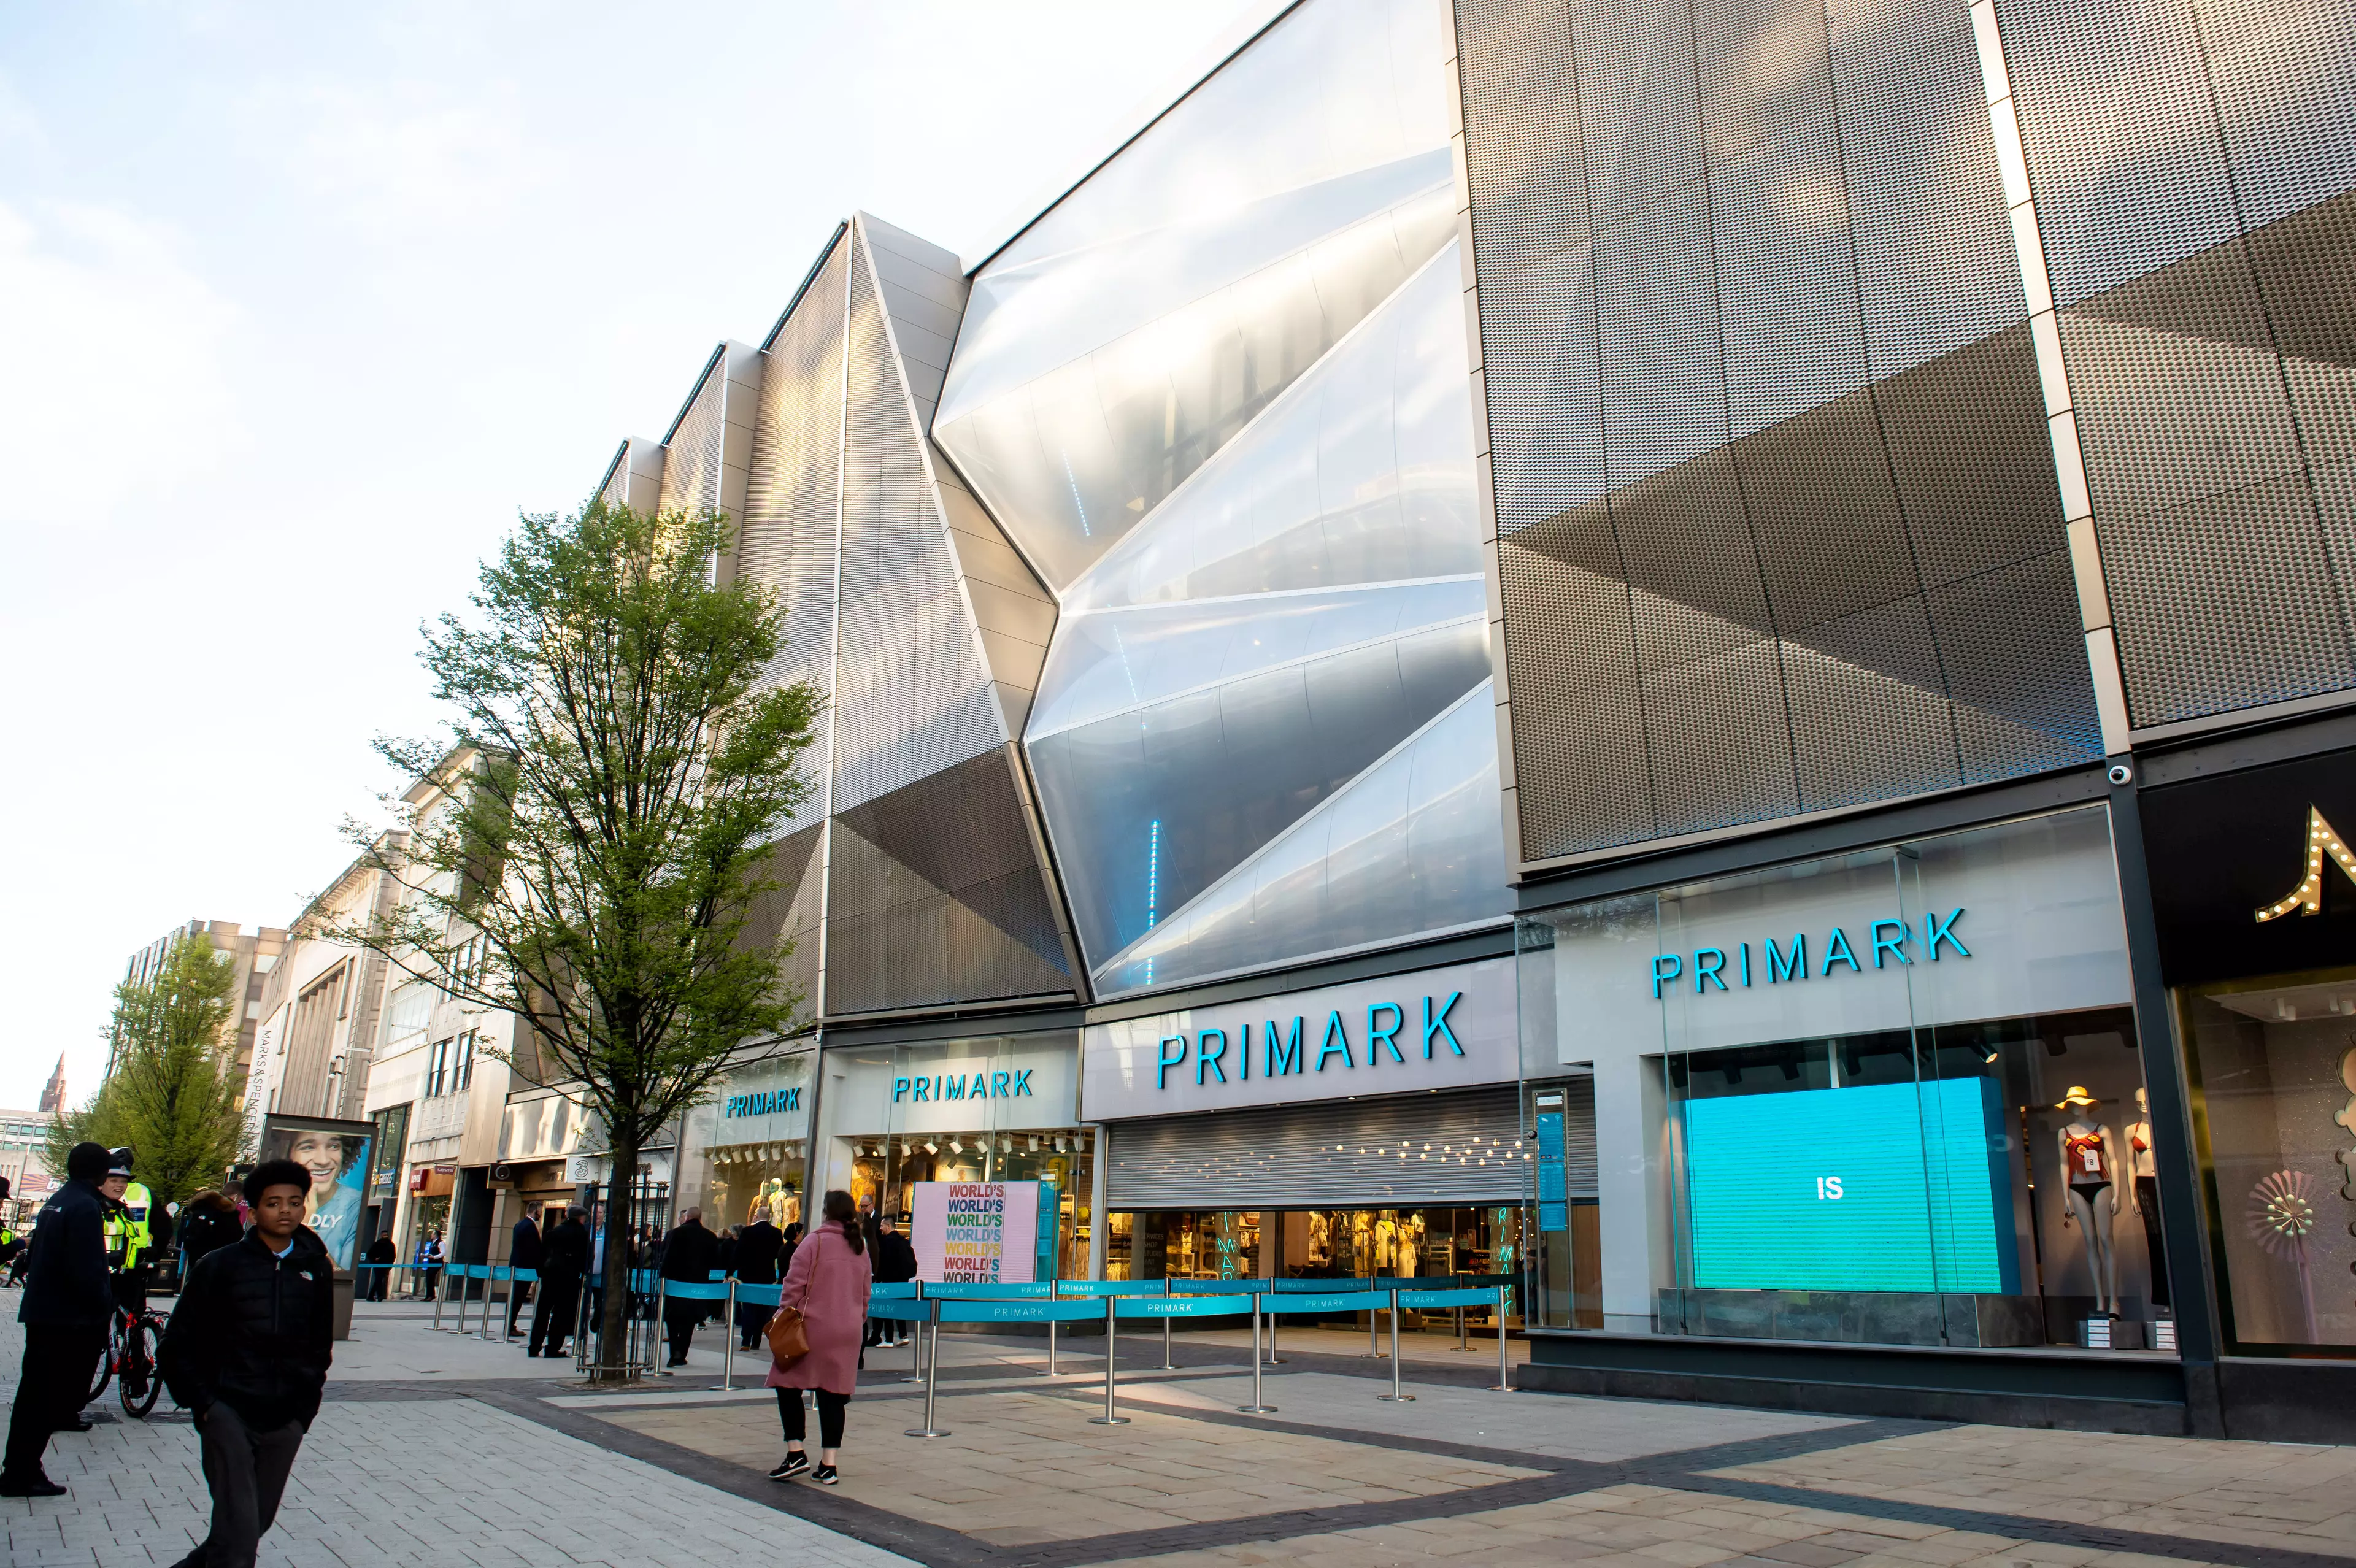 The store is the largest Primark in the world.